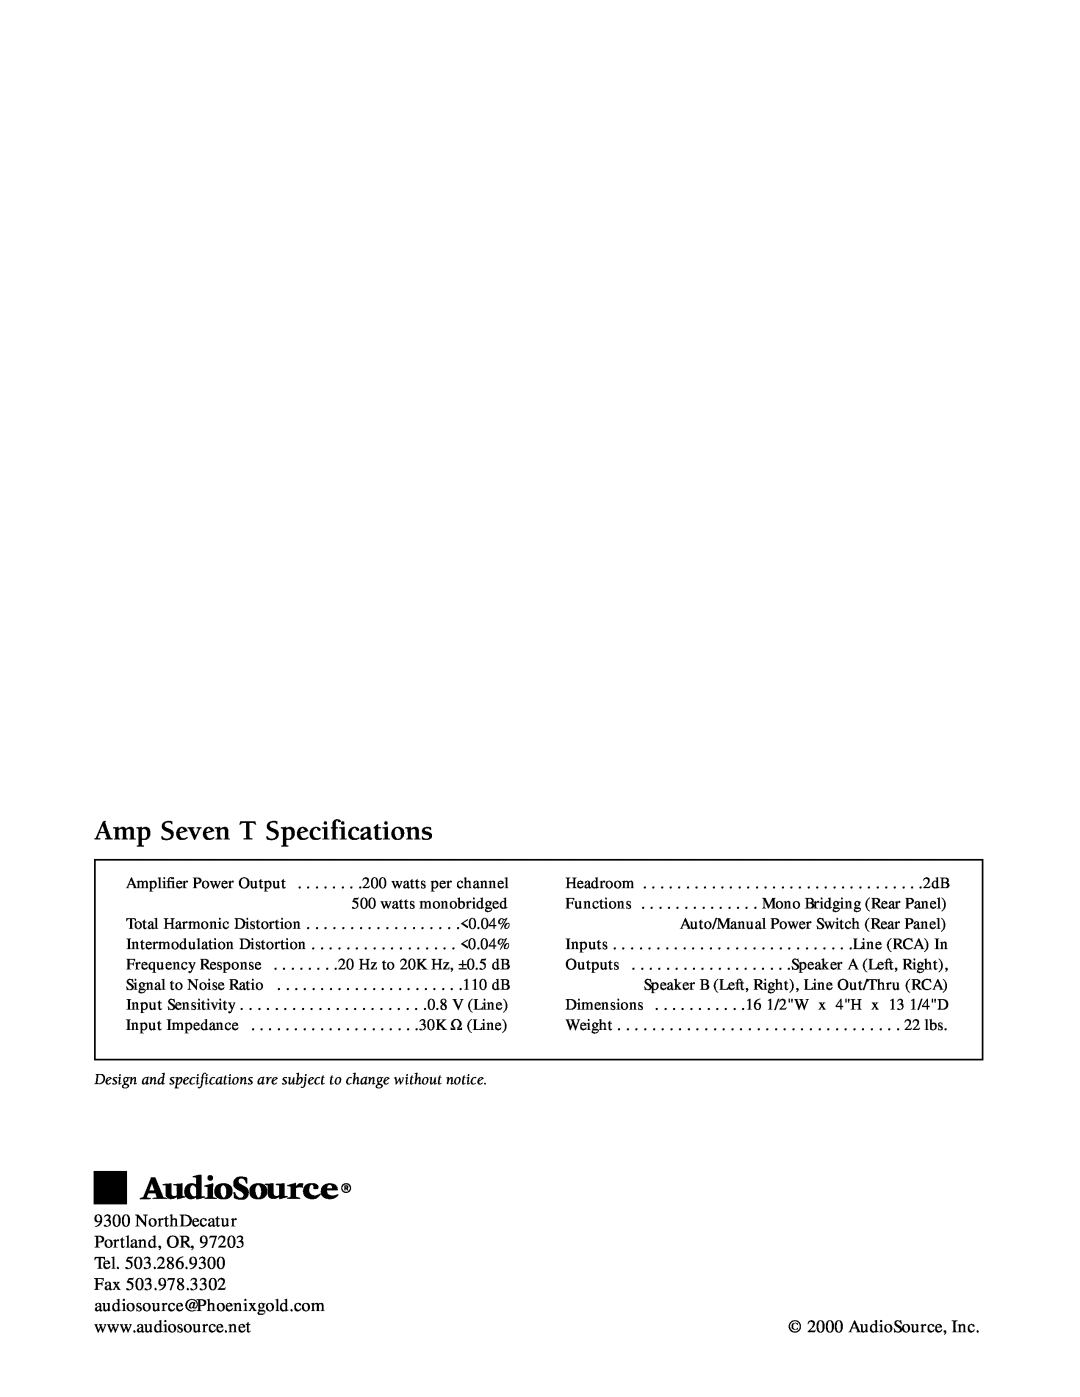 AudioSource owner manual Amp Seven T Specifications, NorthDecatur, Portland, OR, Tel, AudioSource, Inc 